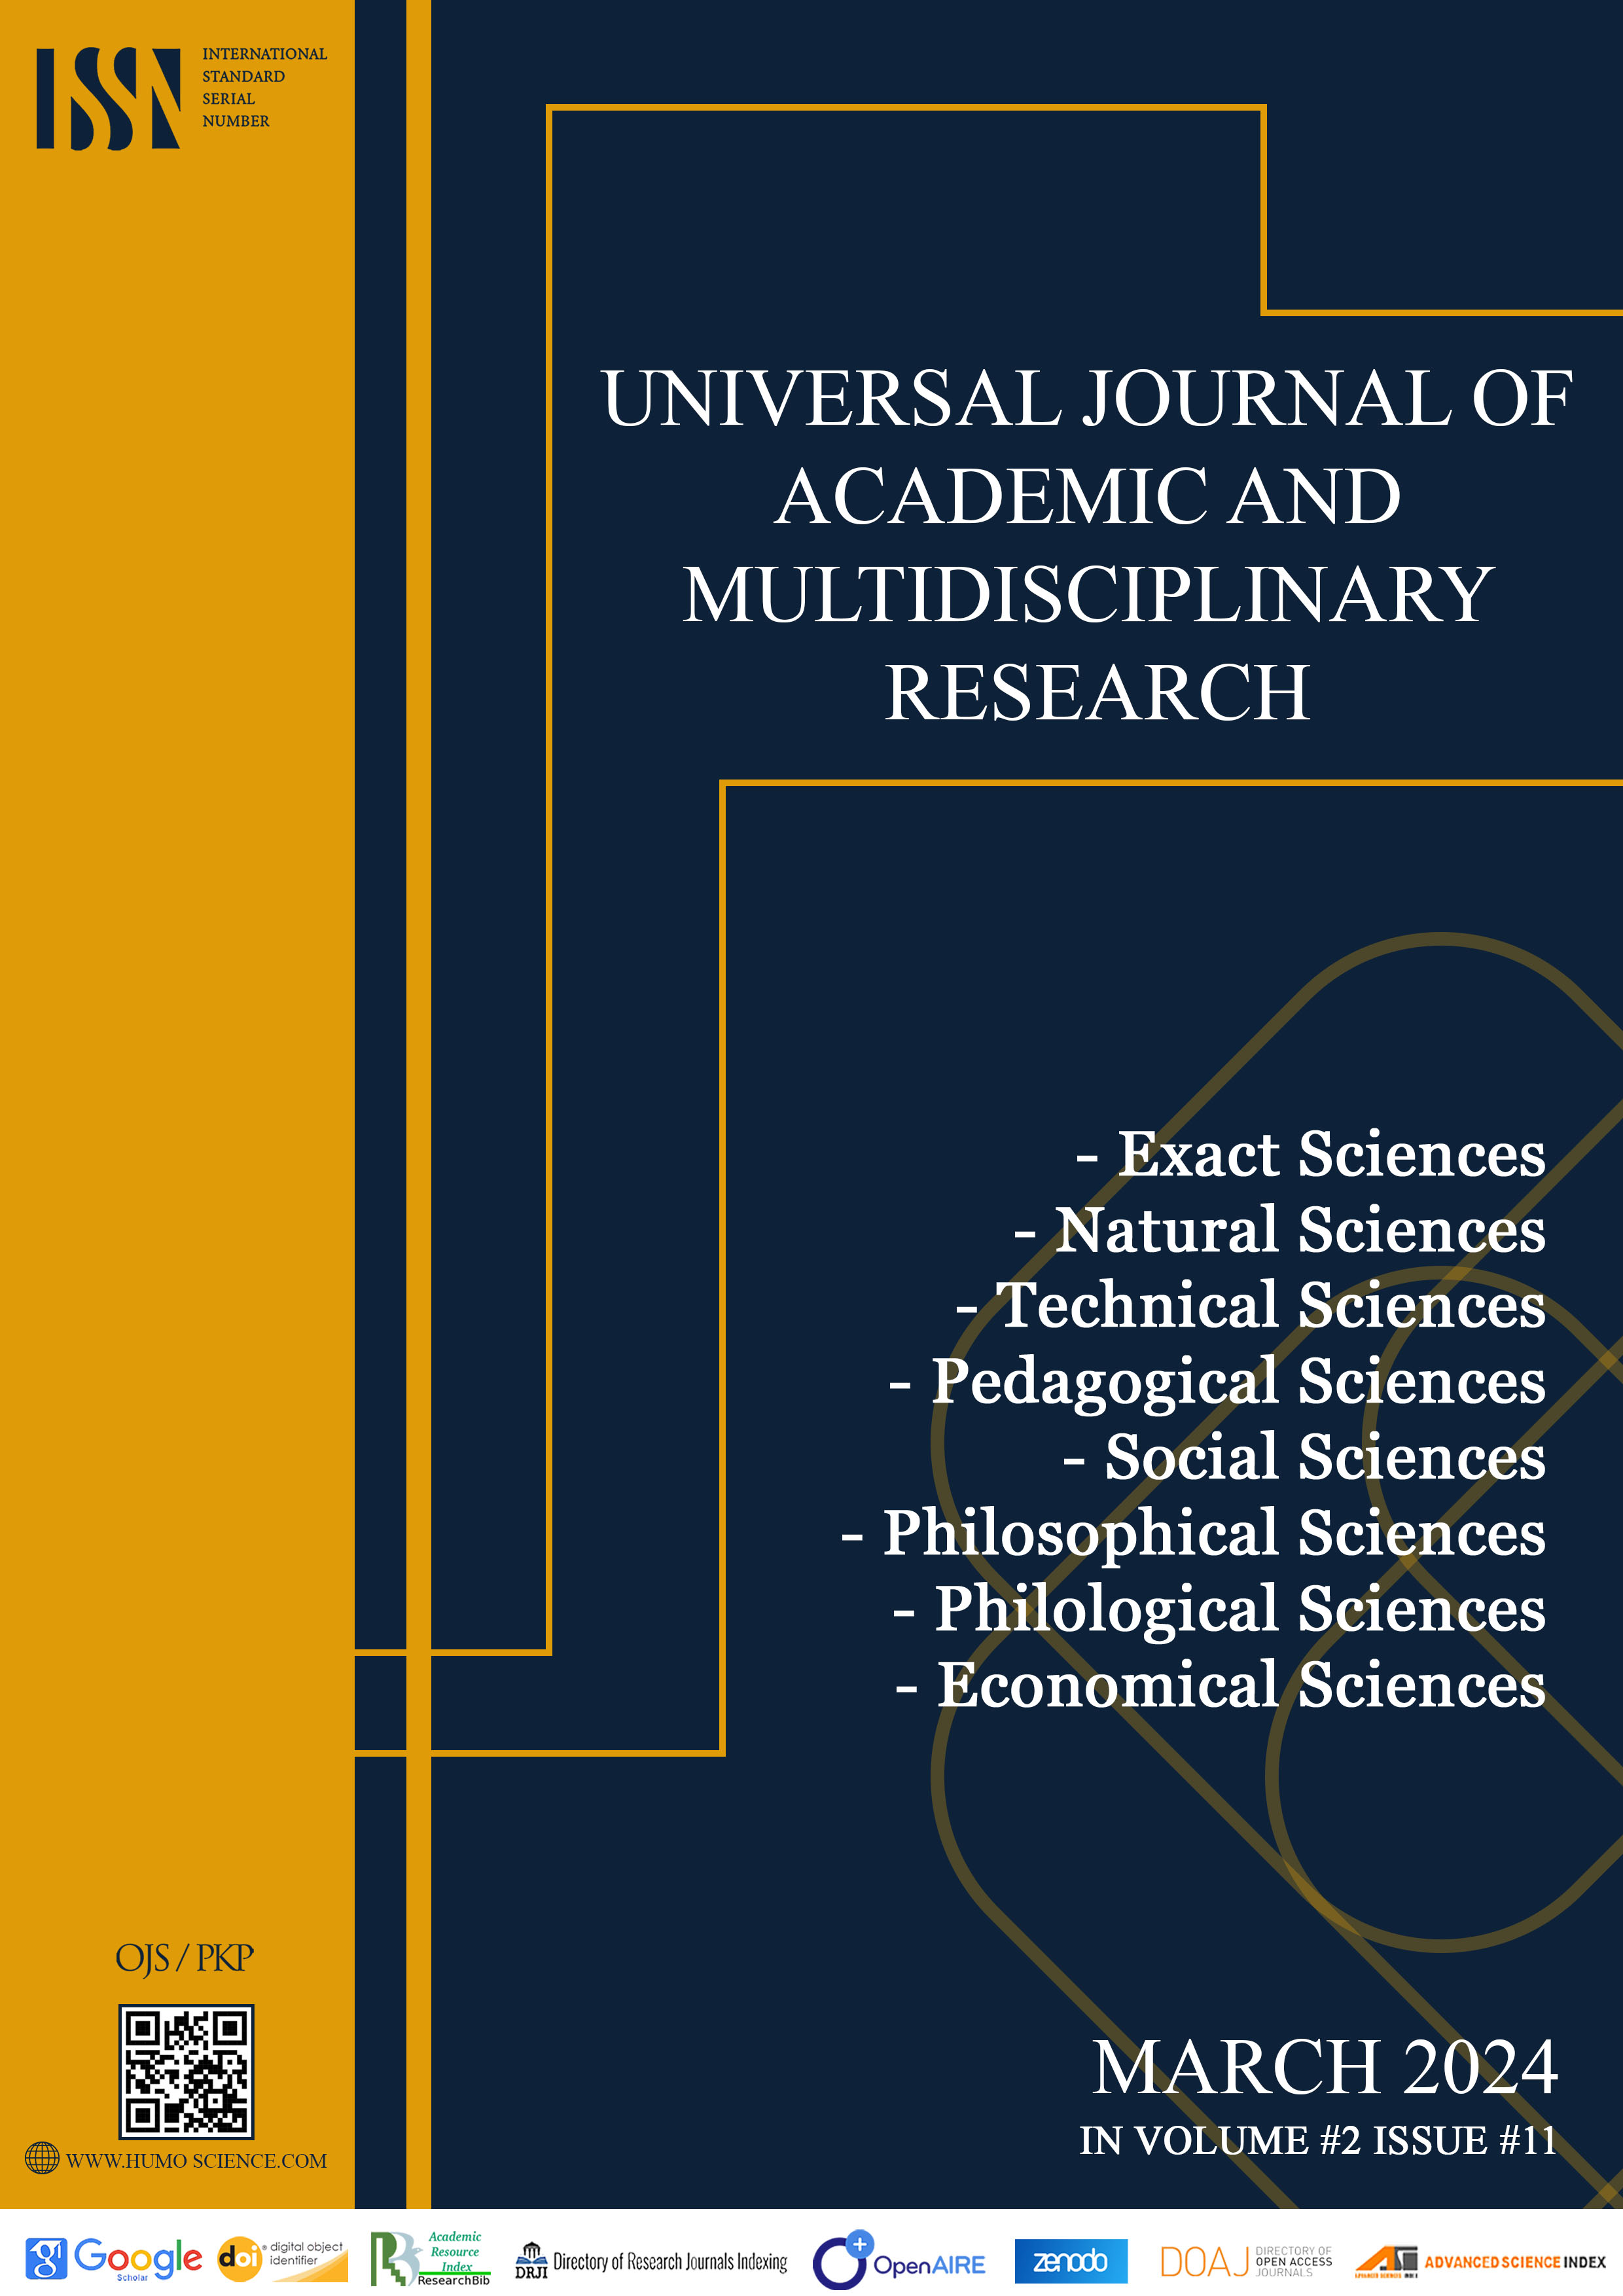 					View Vol. 2 No. 11 (2024): UNIVERSAL JOURNAL OF ACADEMIC AND MULTIDISCIPLINARY RESEARCH
				